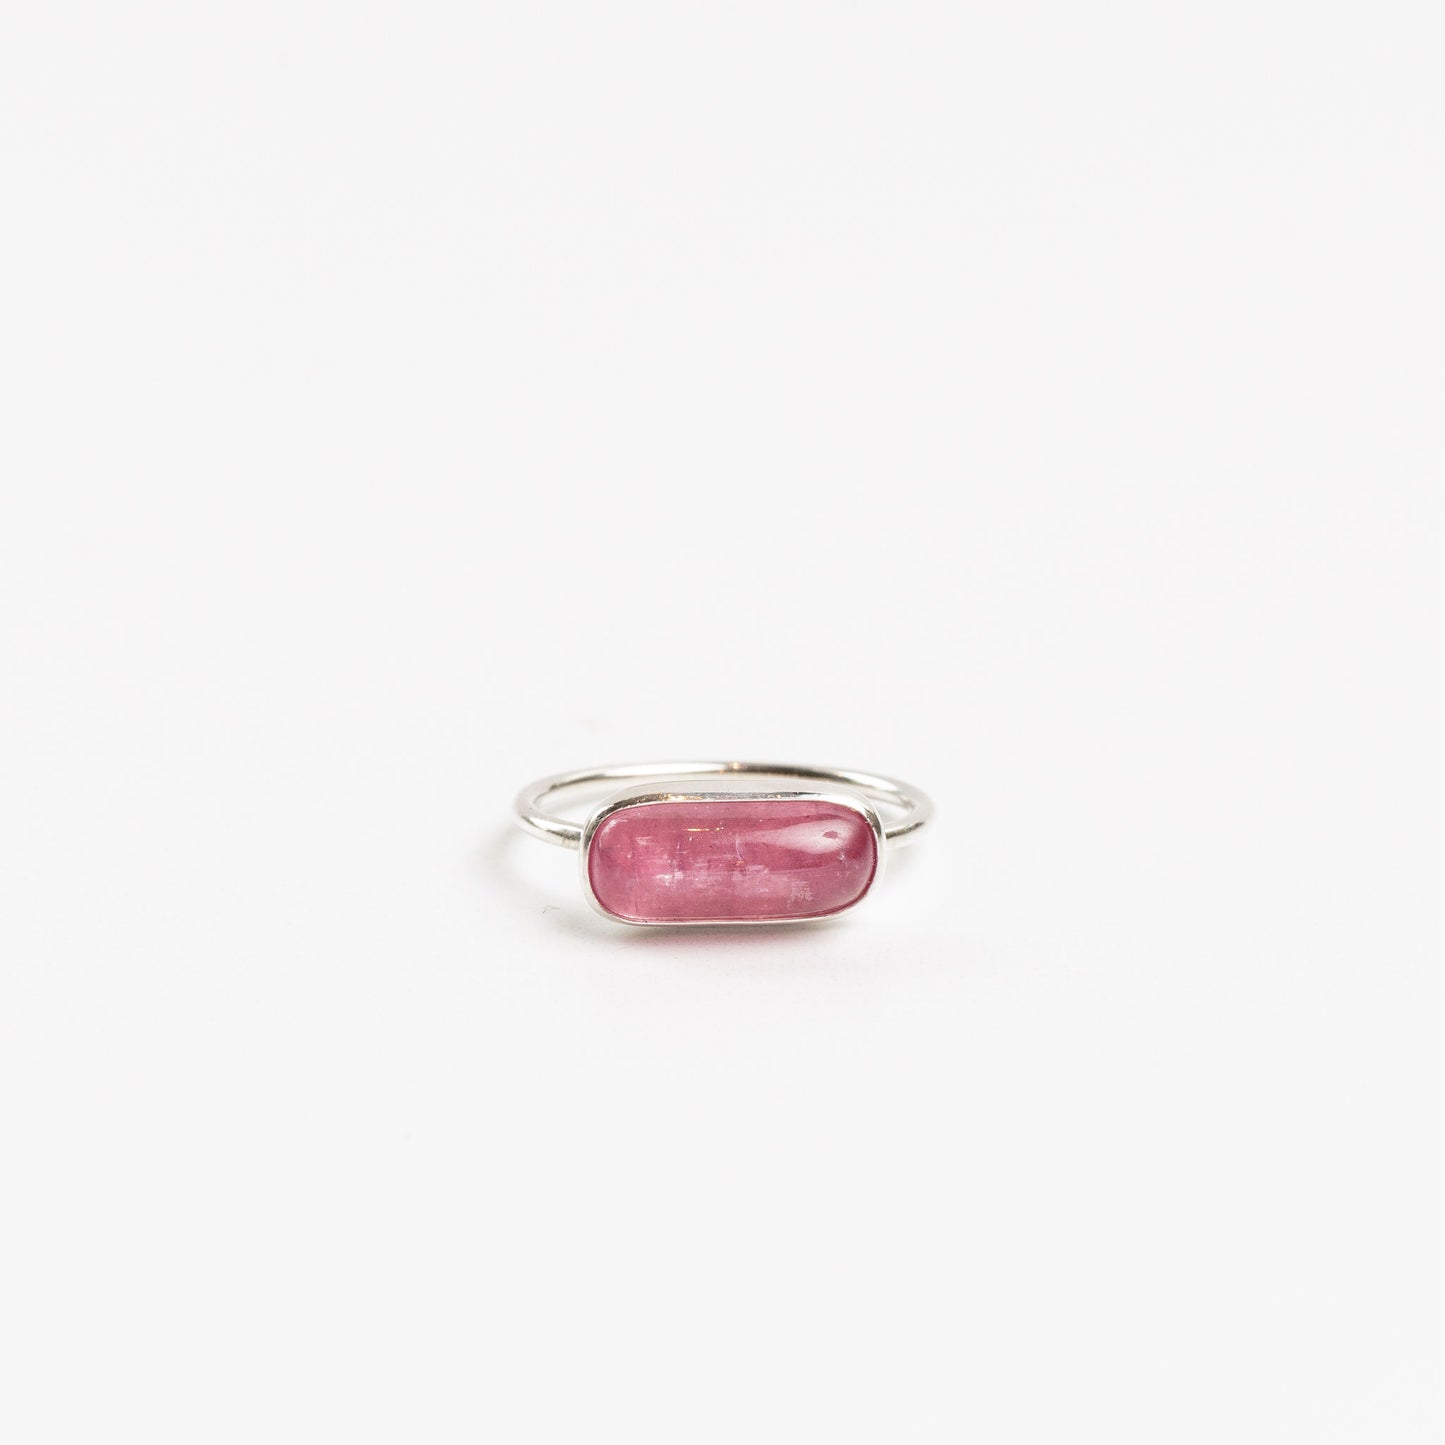 sterling silver ring with bezel set pink tourmaline on a white background